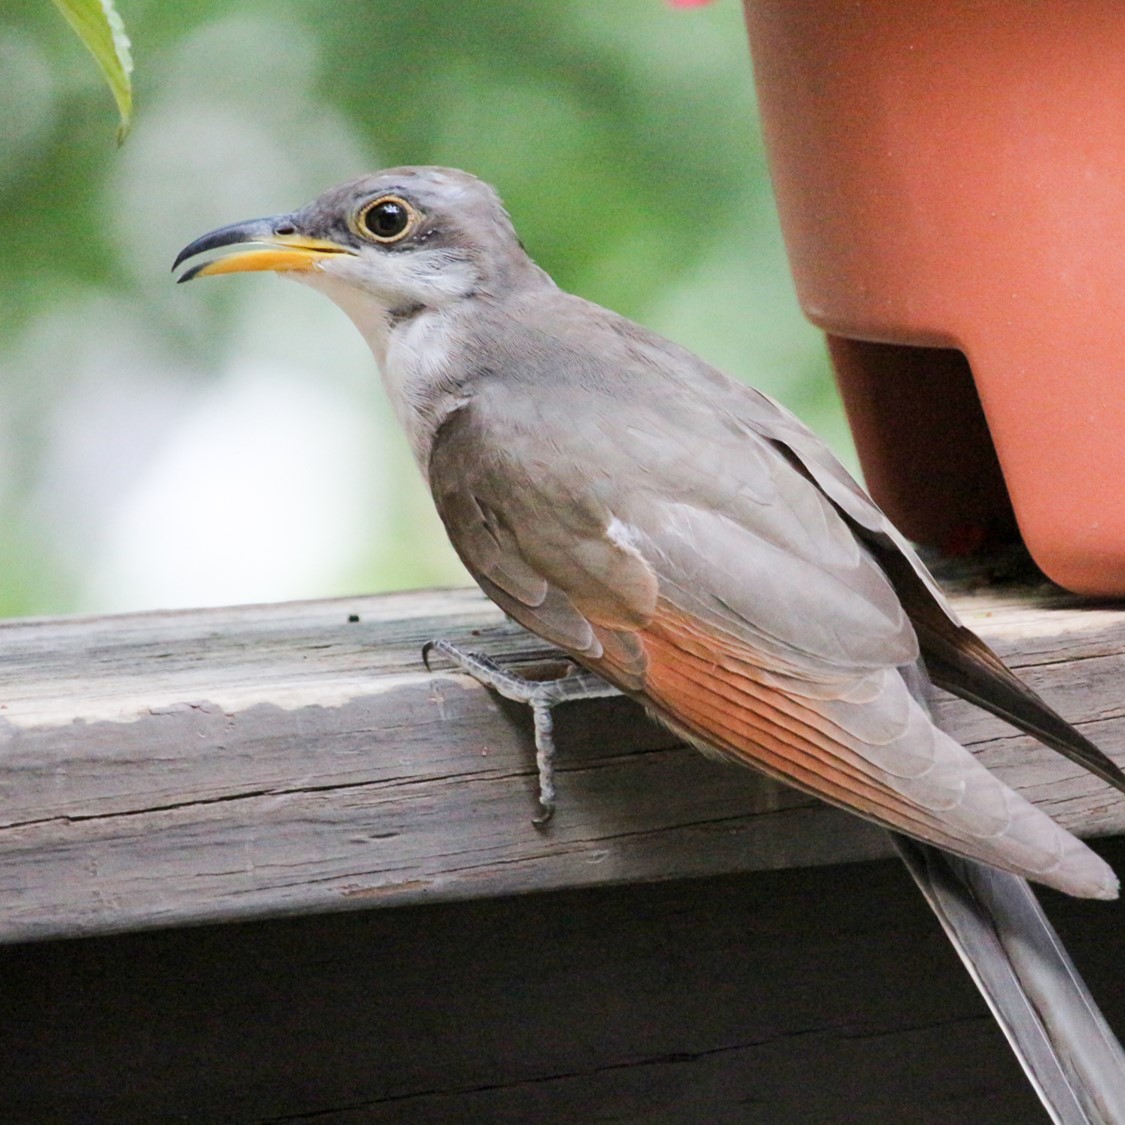 A Yellow-billed Cuckoo perches on a wooden rail next to a potted plant.